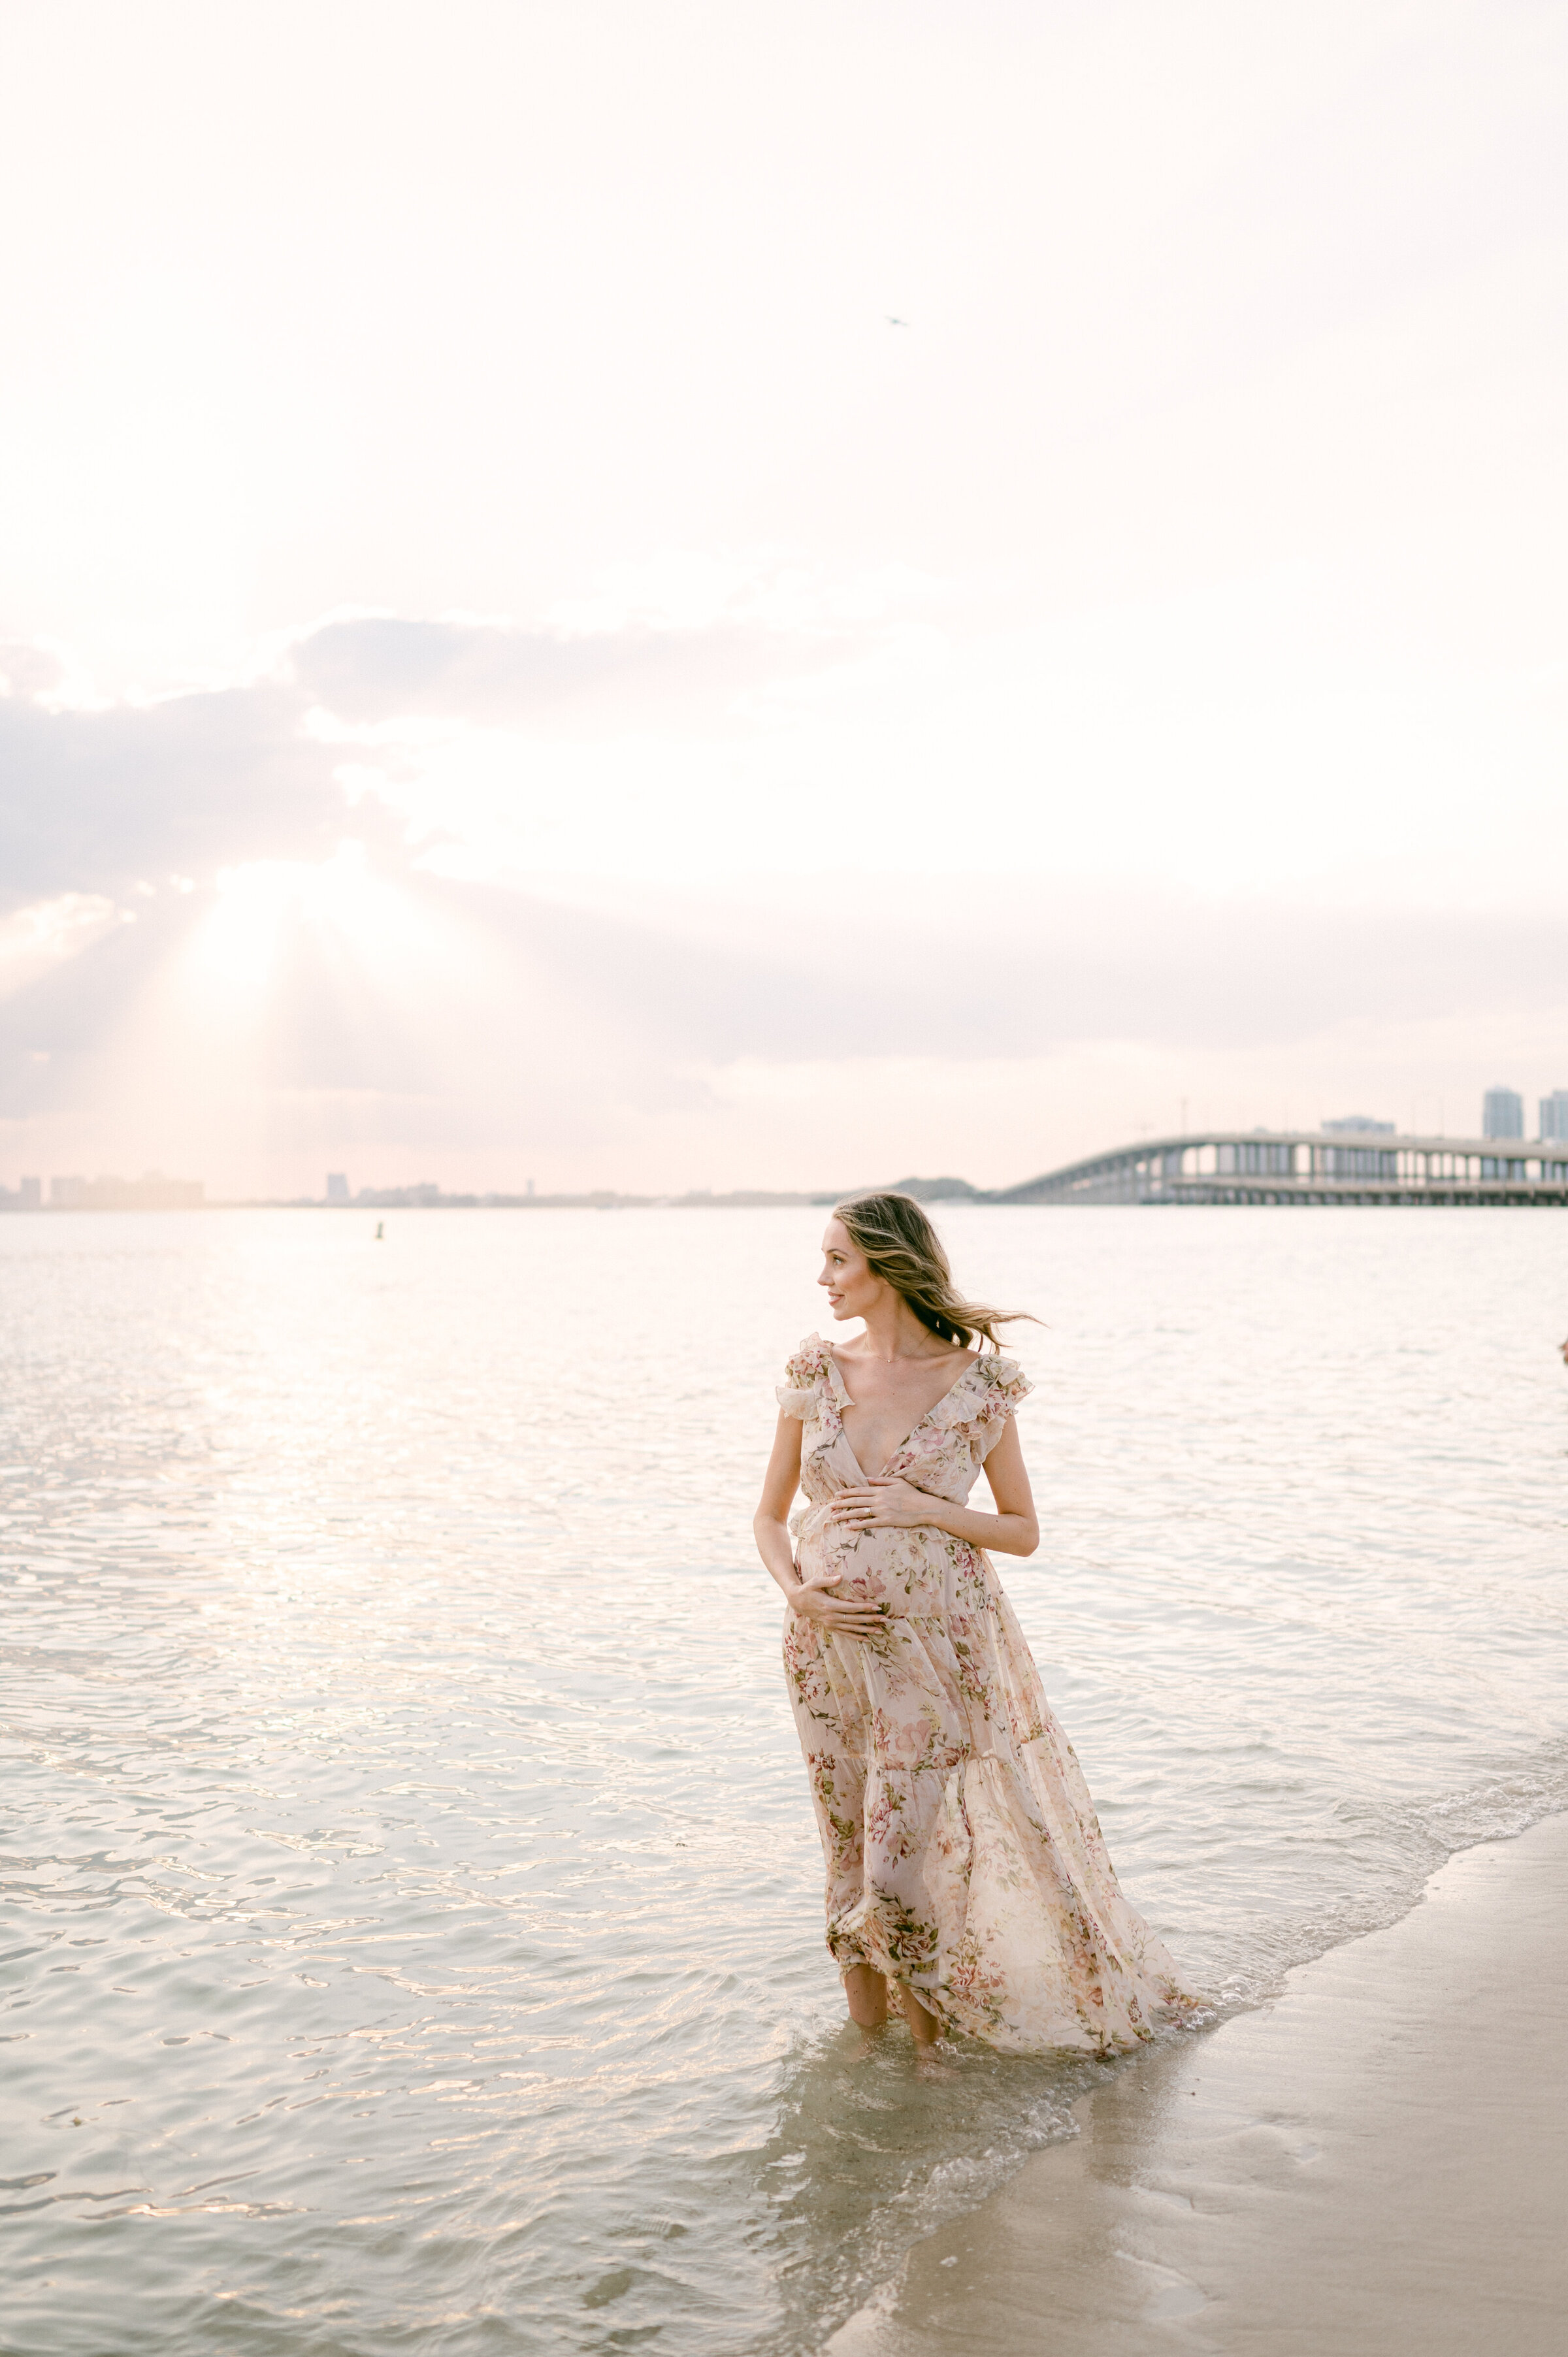 Pregnant woman looking at the sunset with Miami skyline